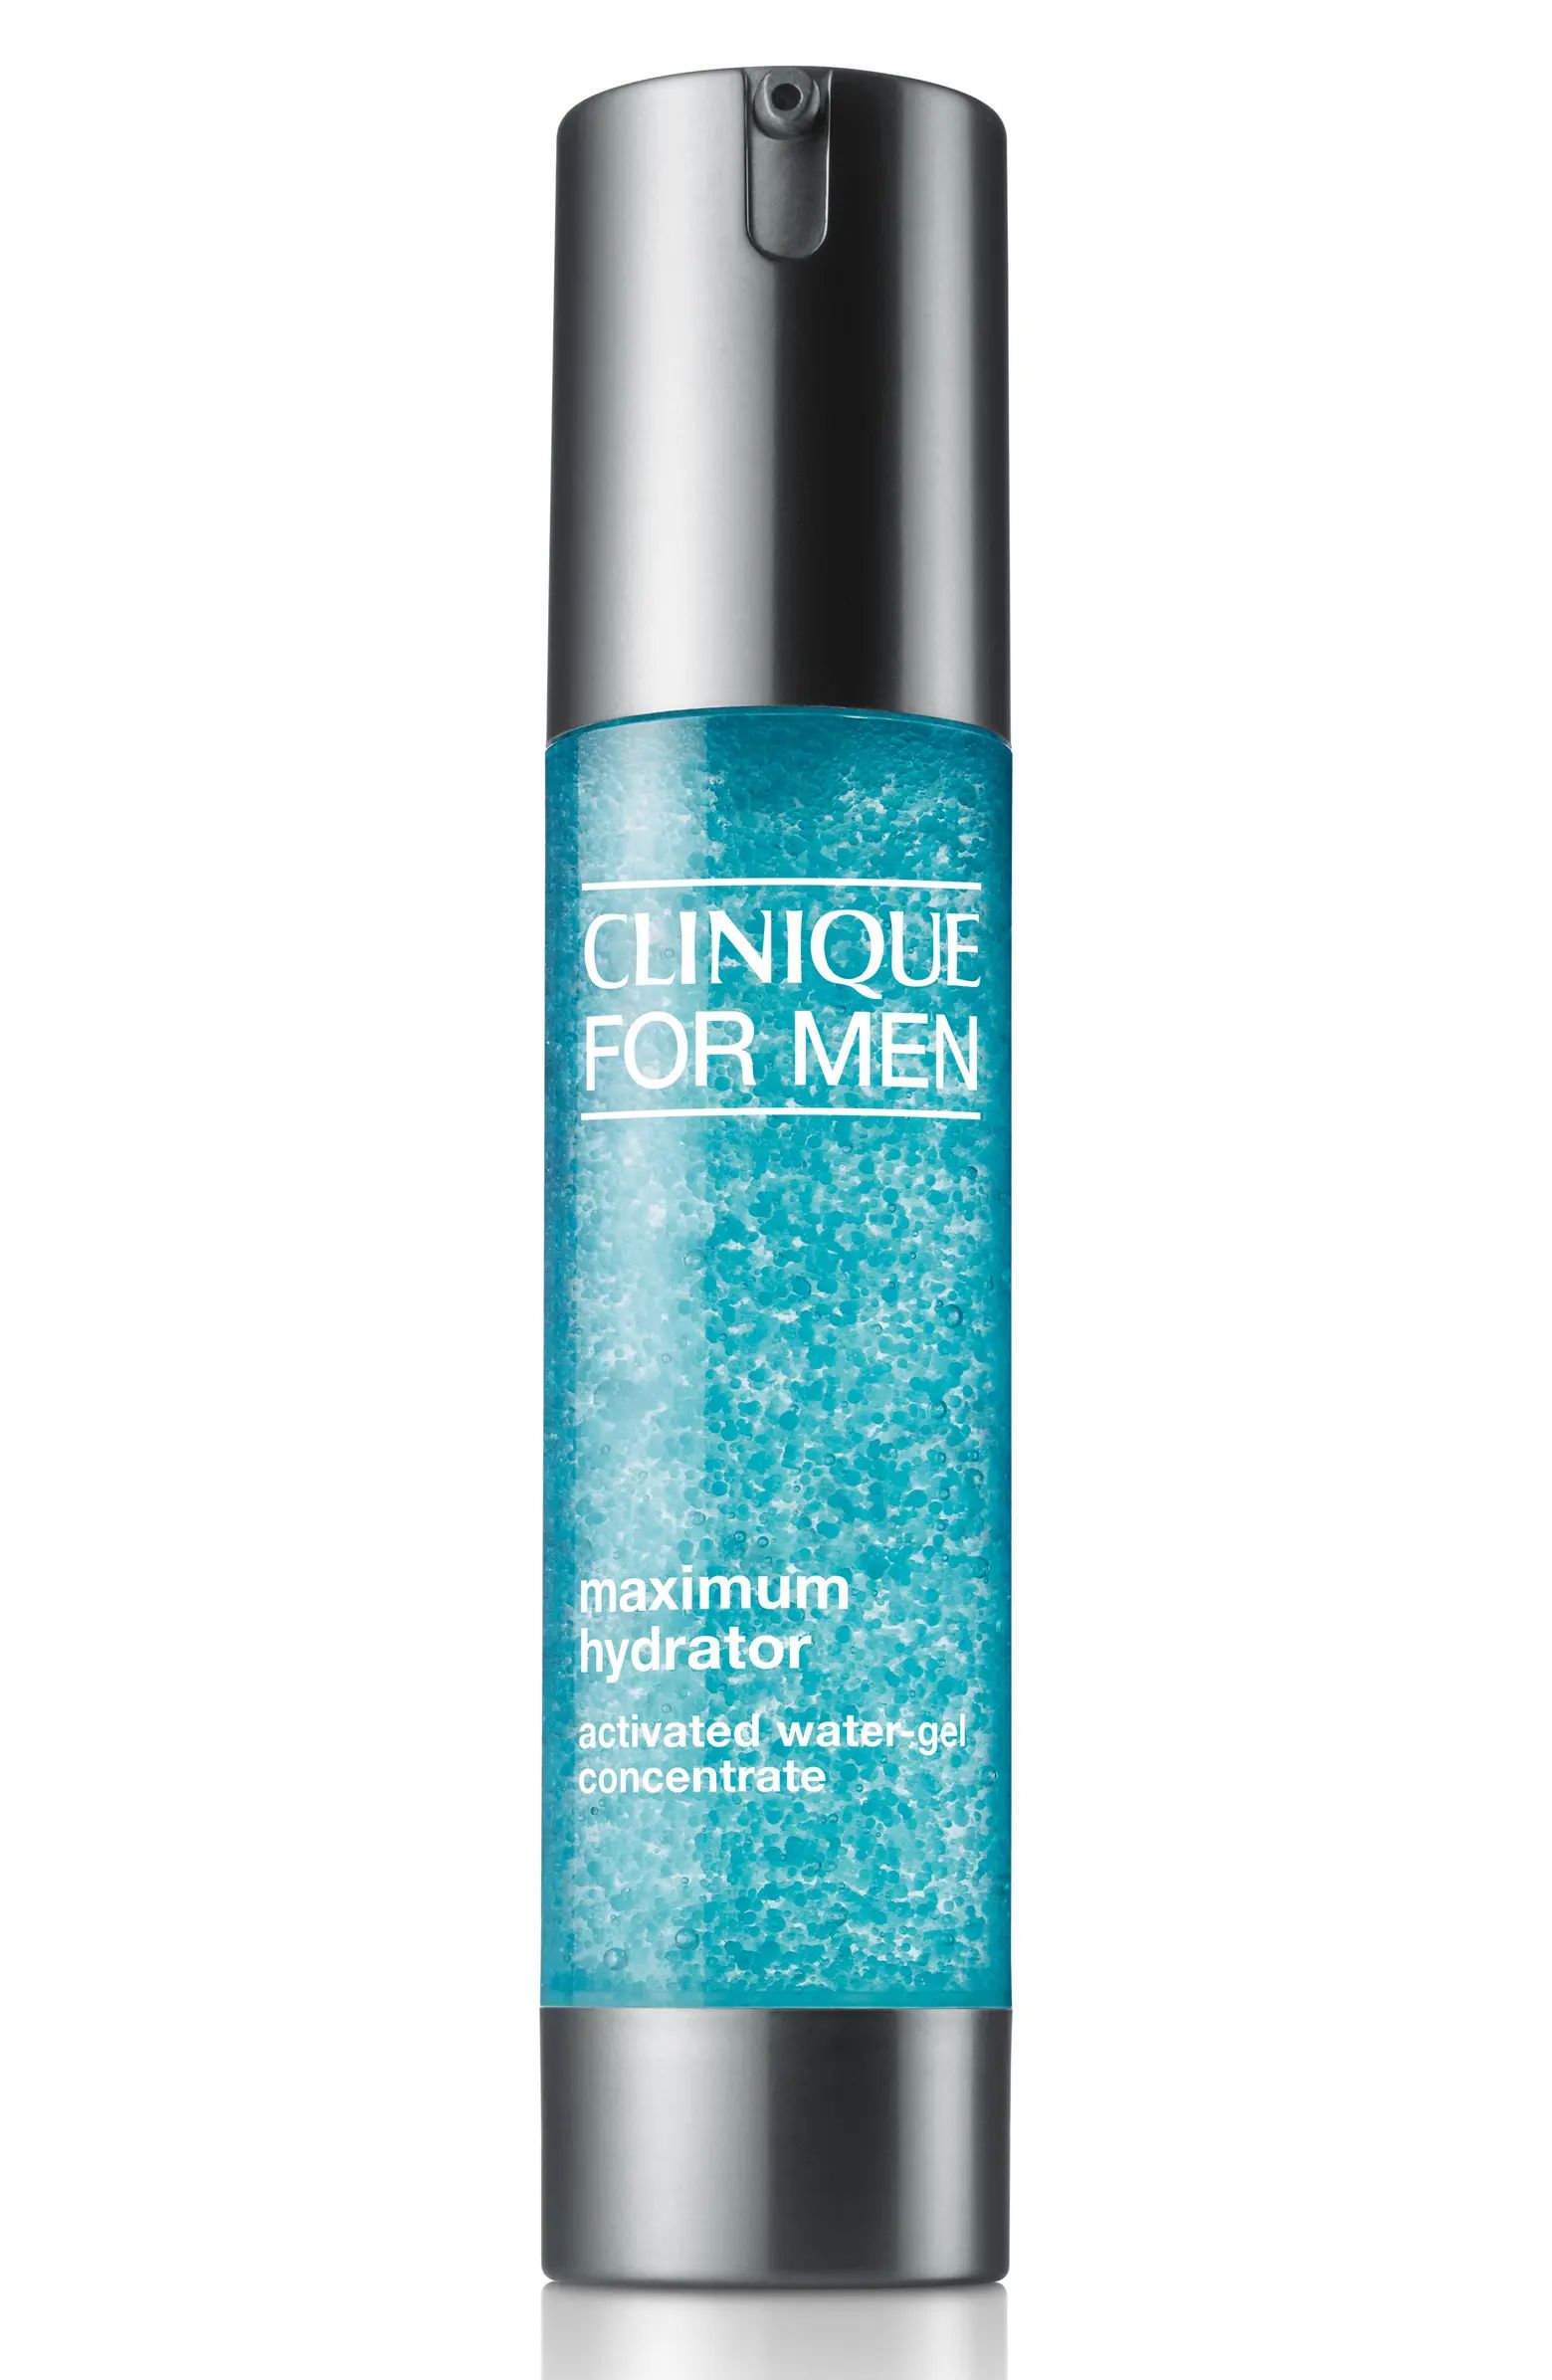 The Clinique for Men Maximum Hydrator Activated Water-Gel Concentrate | Nordstrom